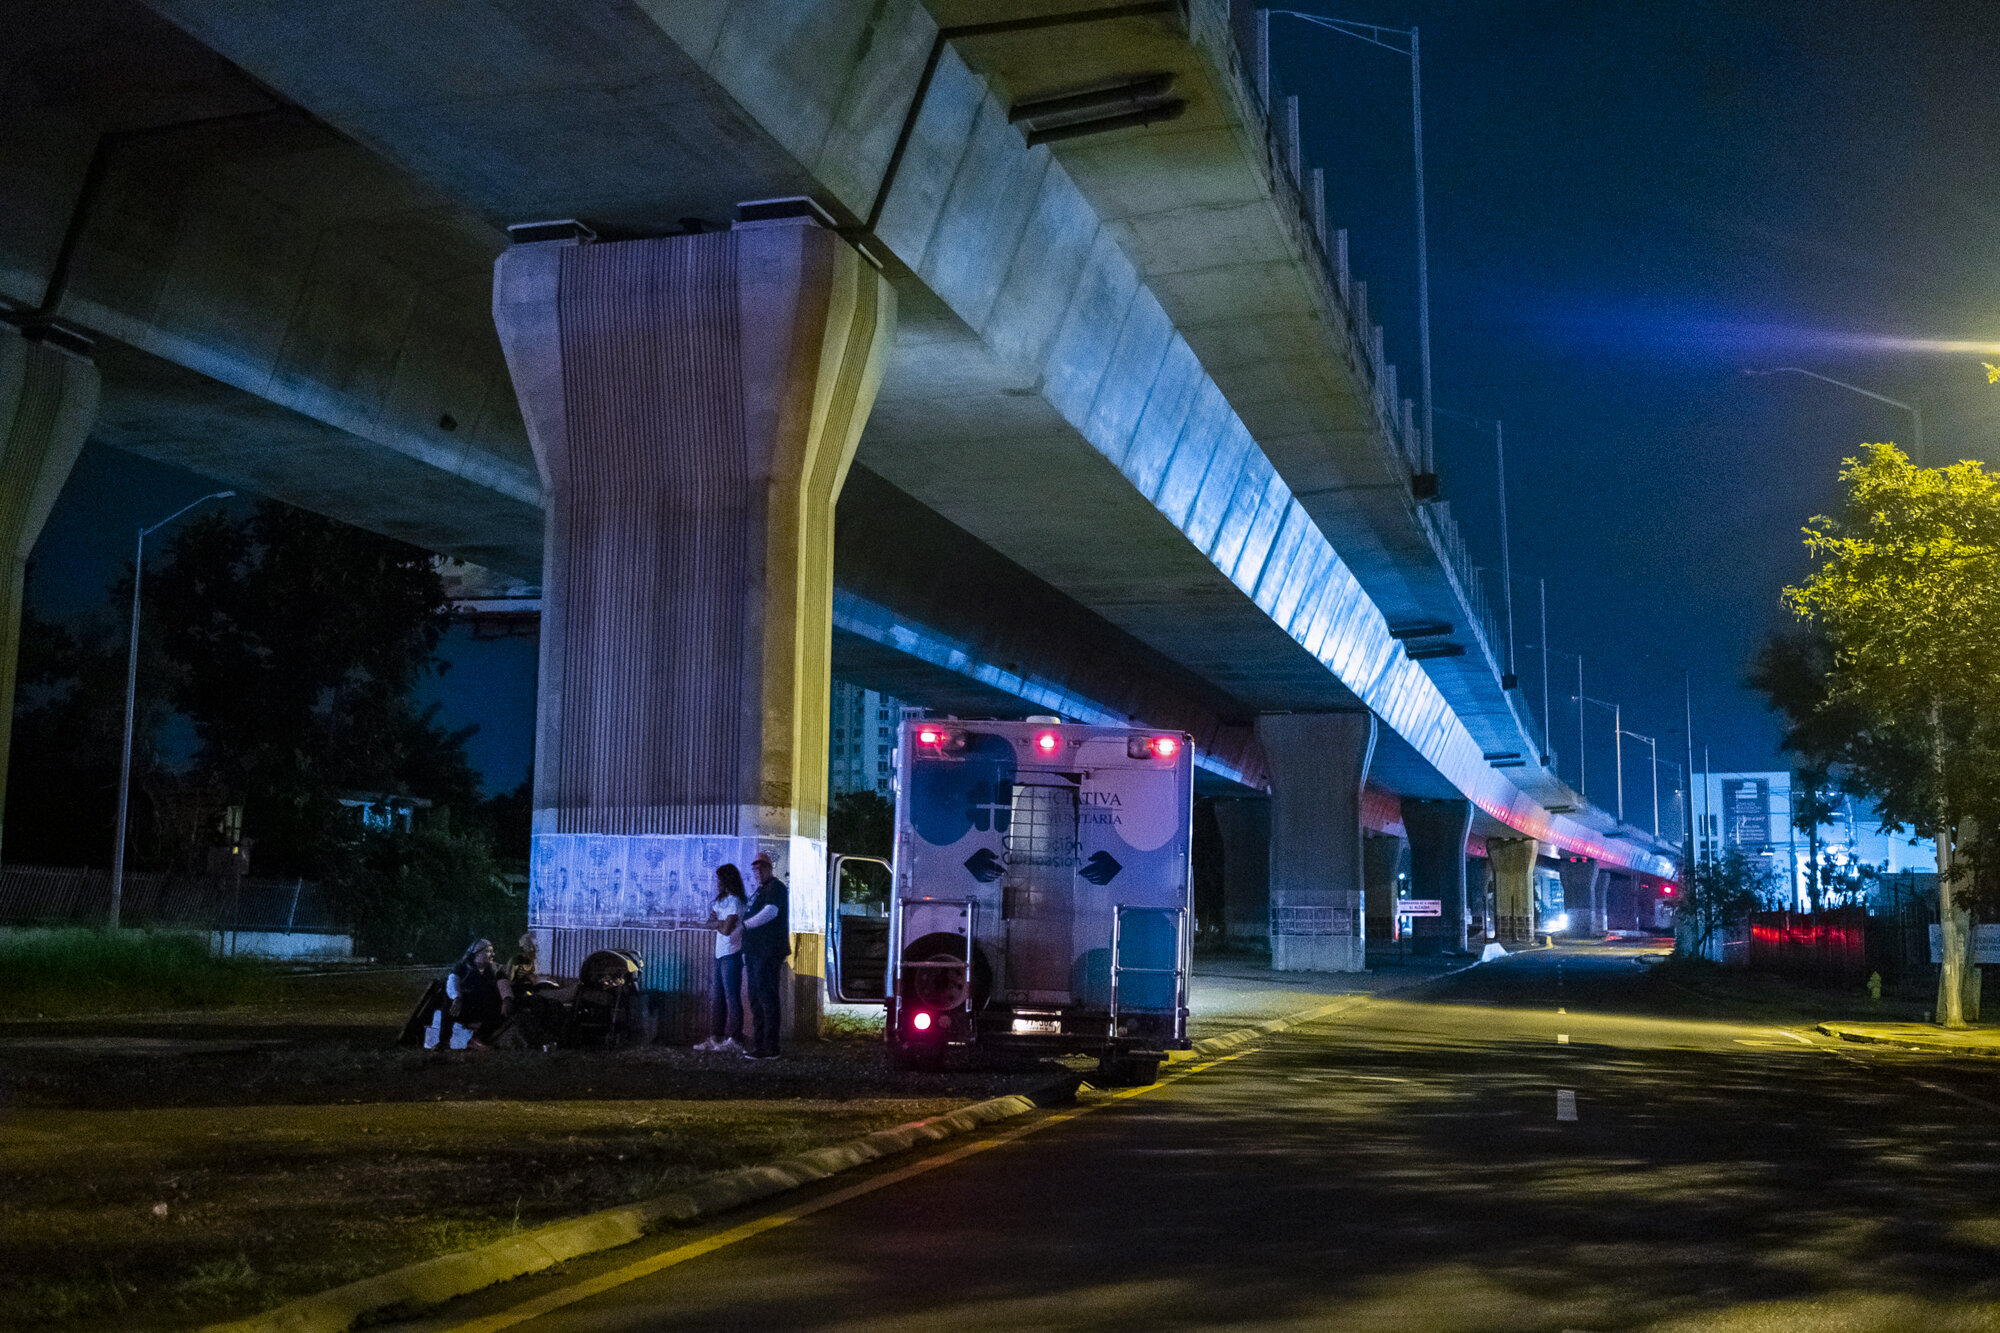  Iniciativa Comunitaria’s nocturnal outreach program tours San Juan every week. Tonight they stop under a highway bridge to offer food and comfort to an elderly homeless man.  